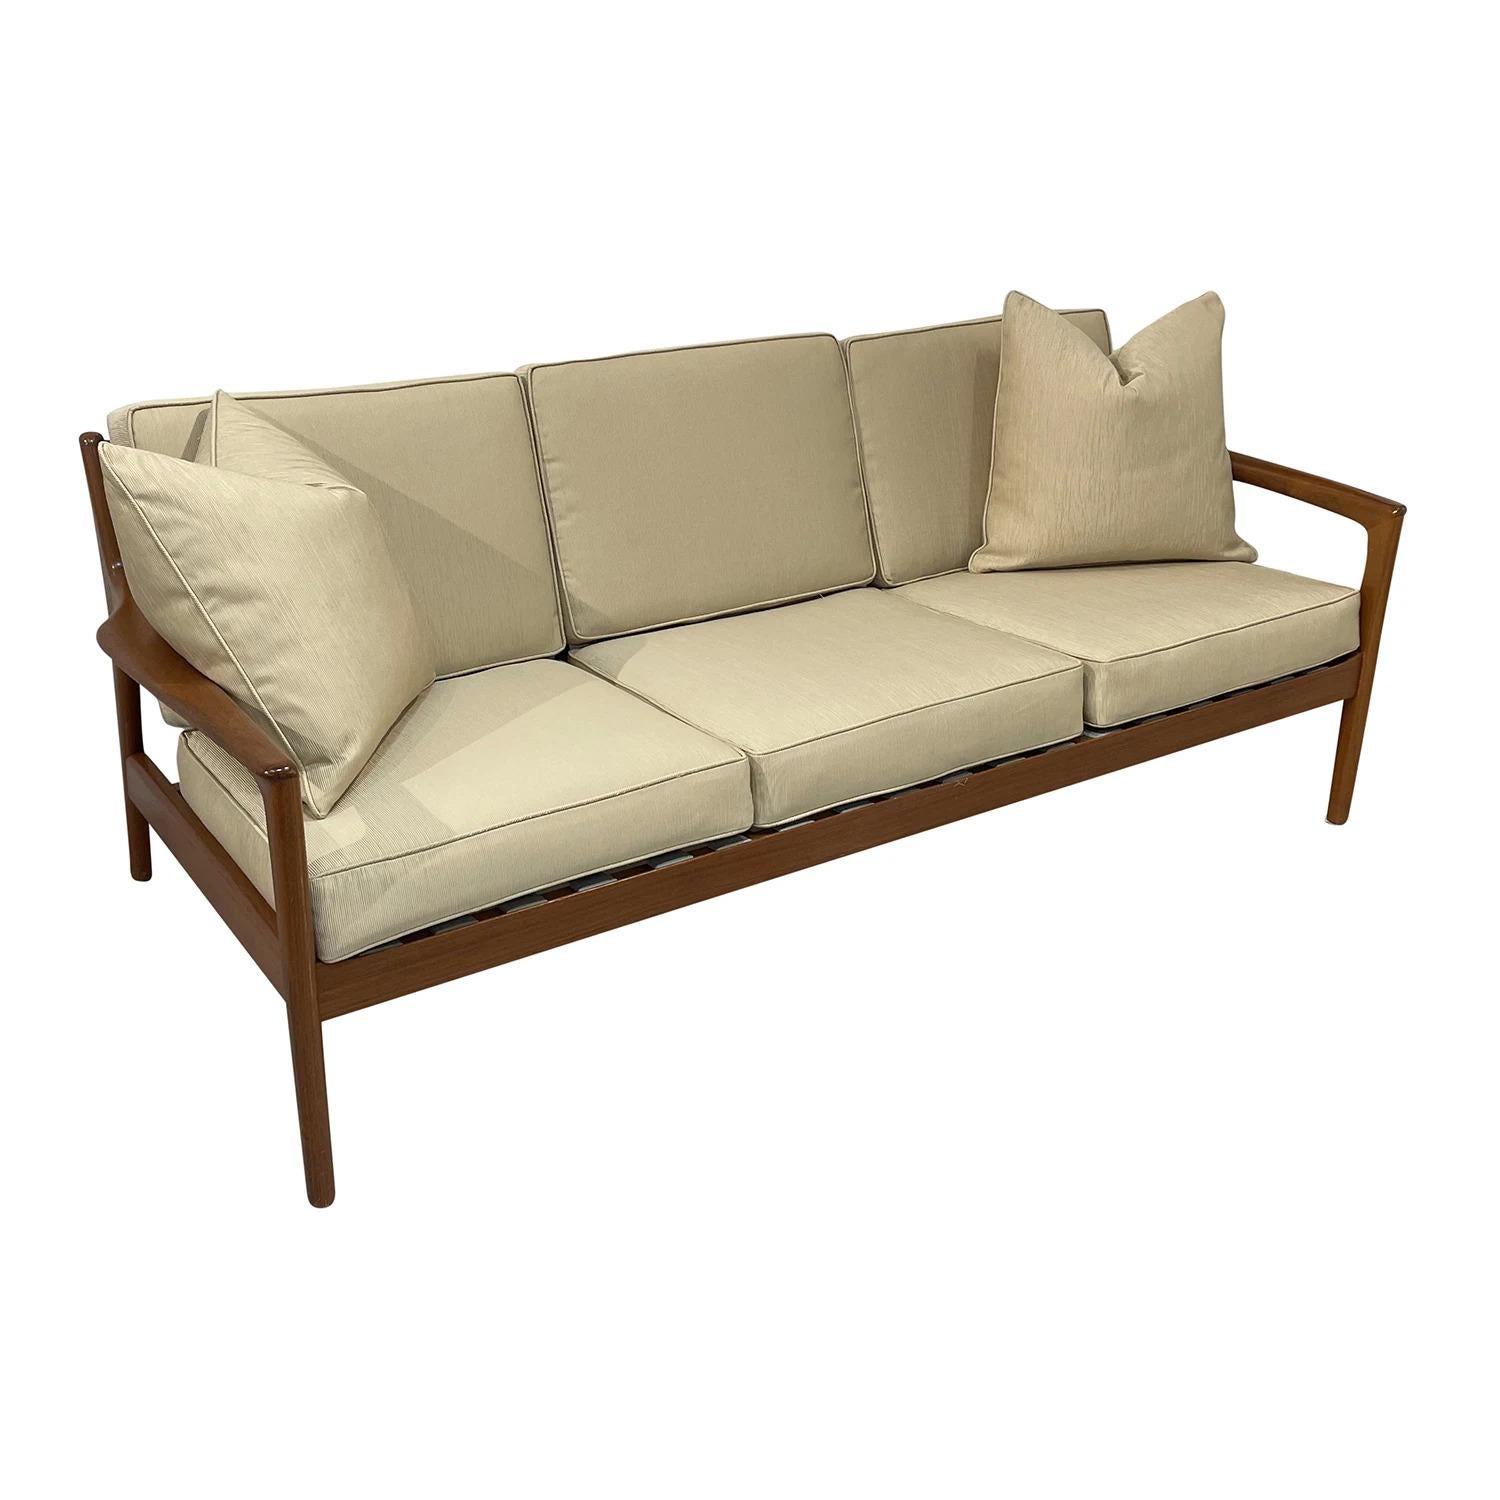 20th Century Swedish Dux Three Seater Teak Sofa, Vintage Settee by Folke Ohlsson In Good Condition For Sale In West Palm Beach, FL